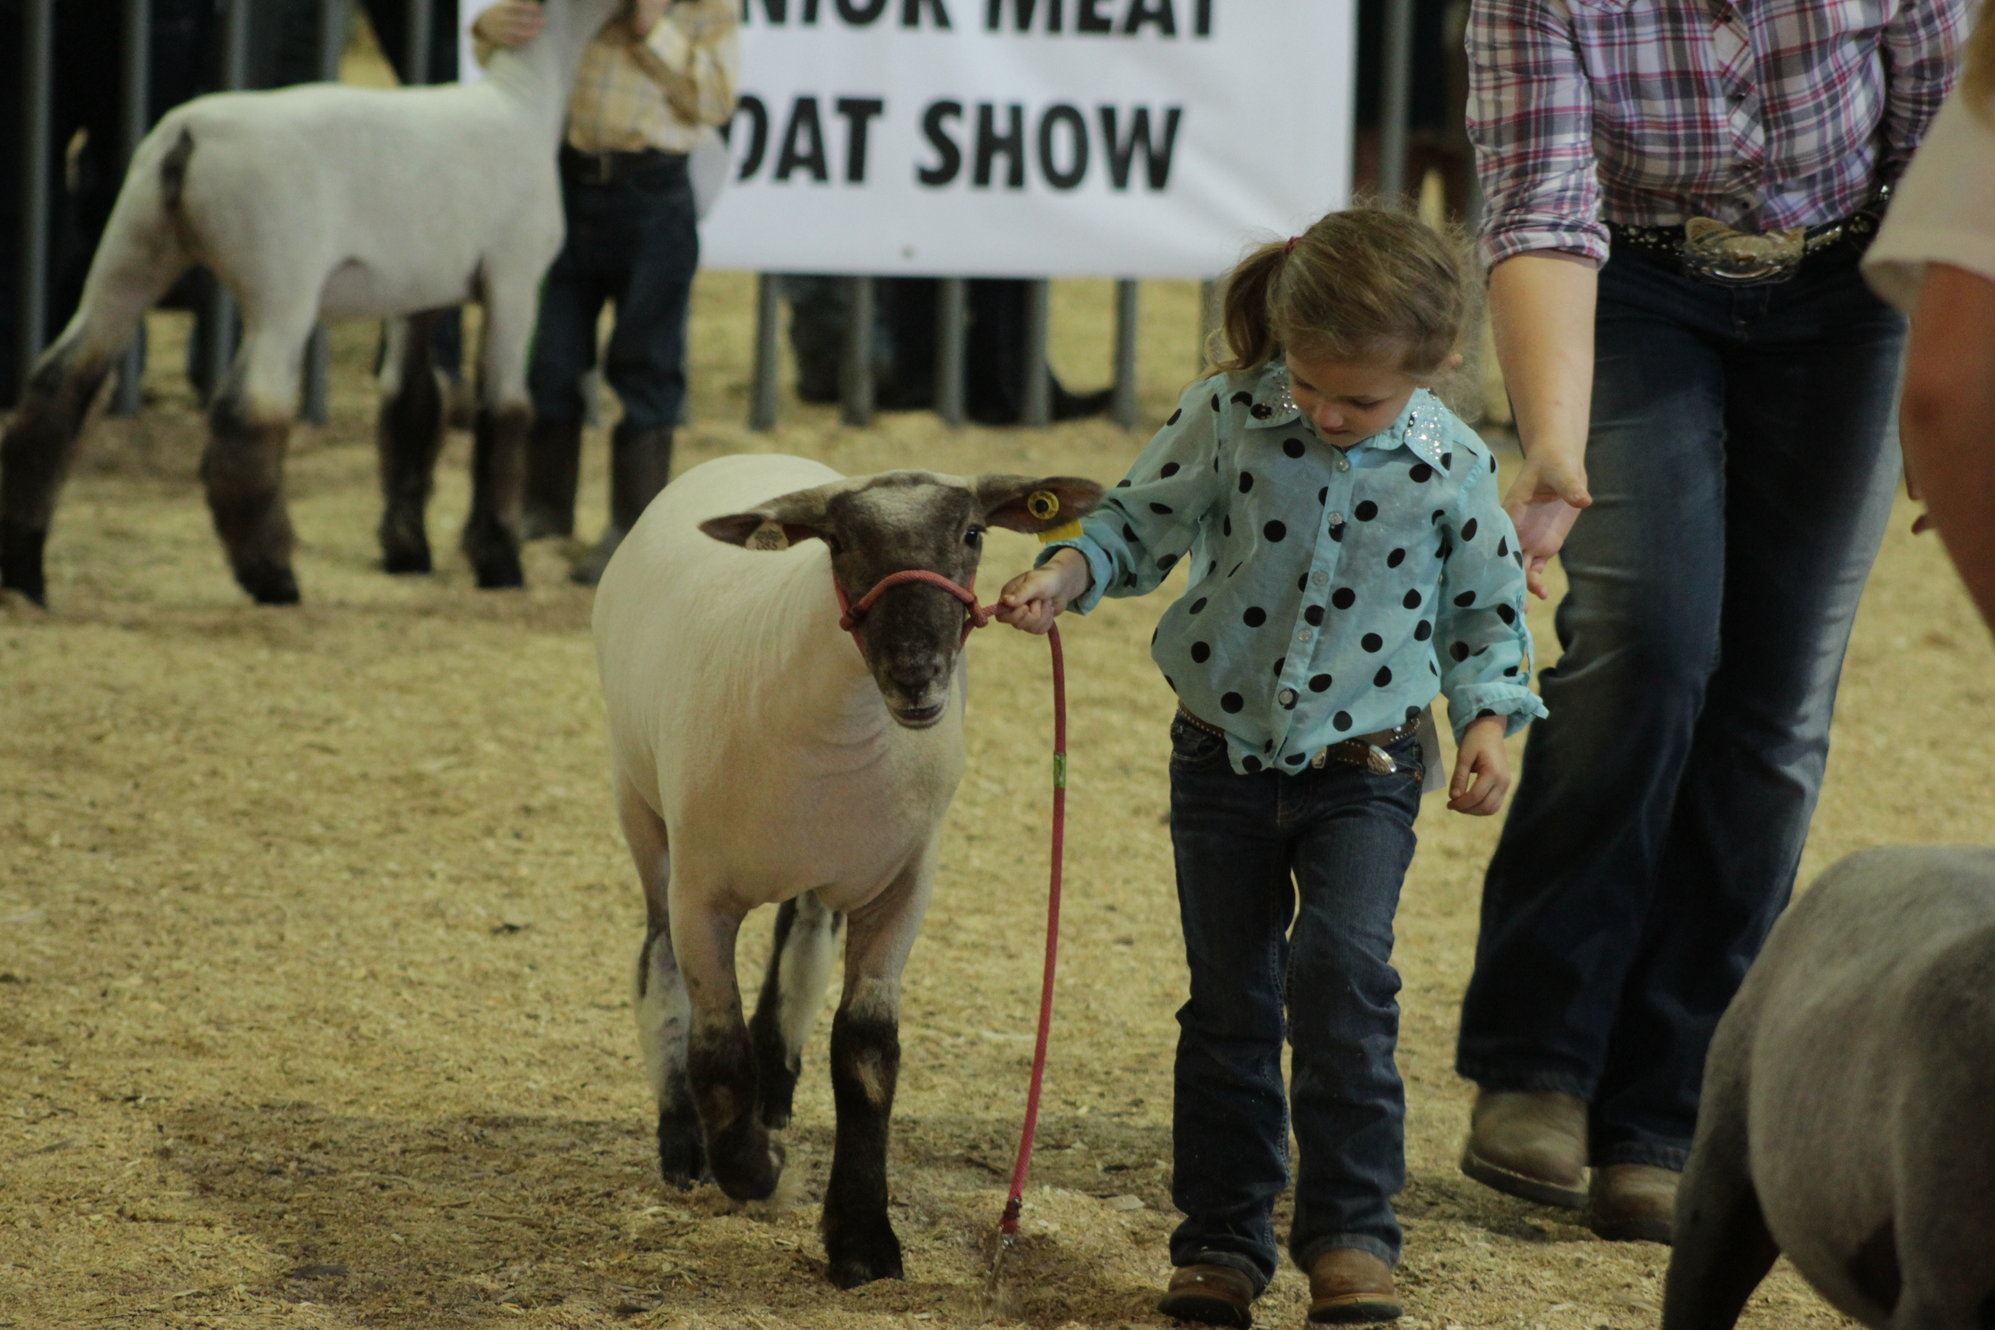 A child leads a sheep in a show.